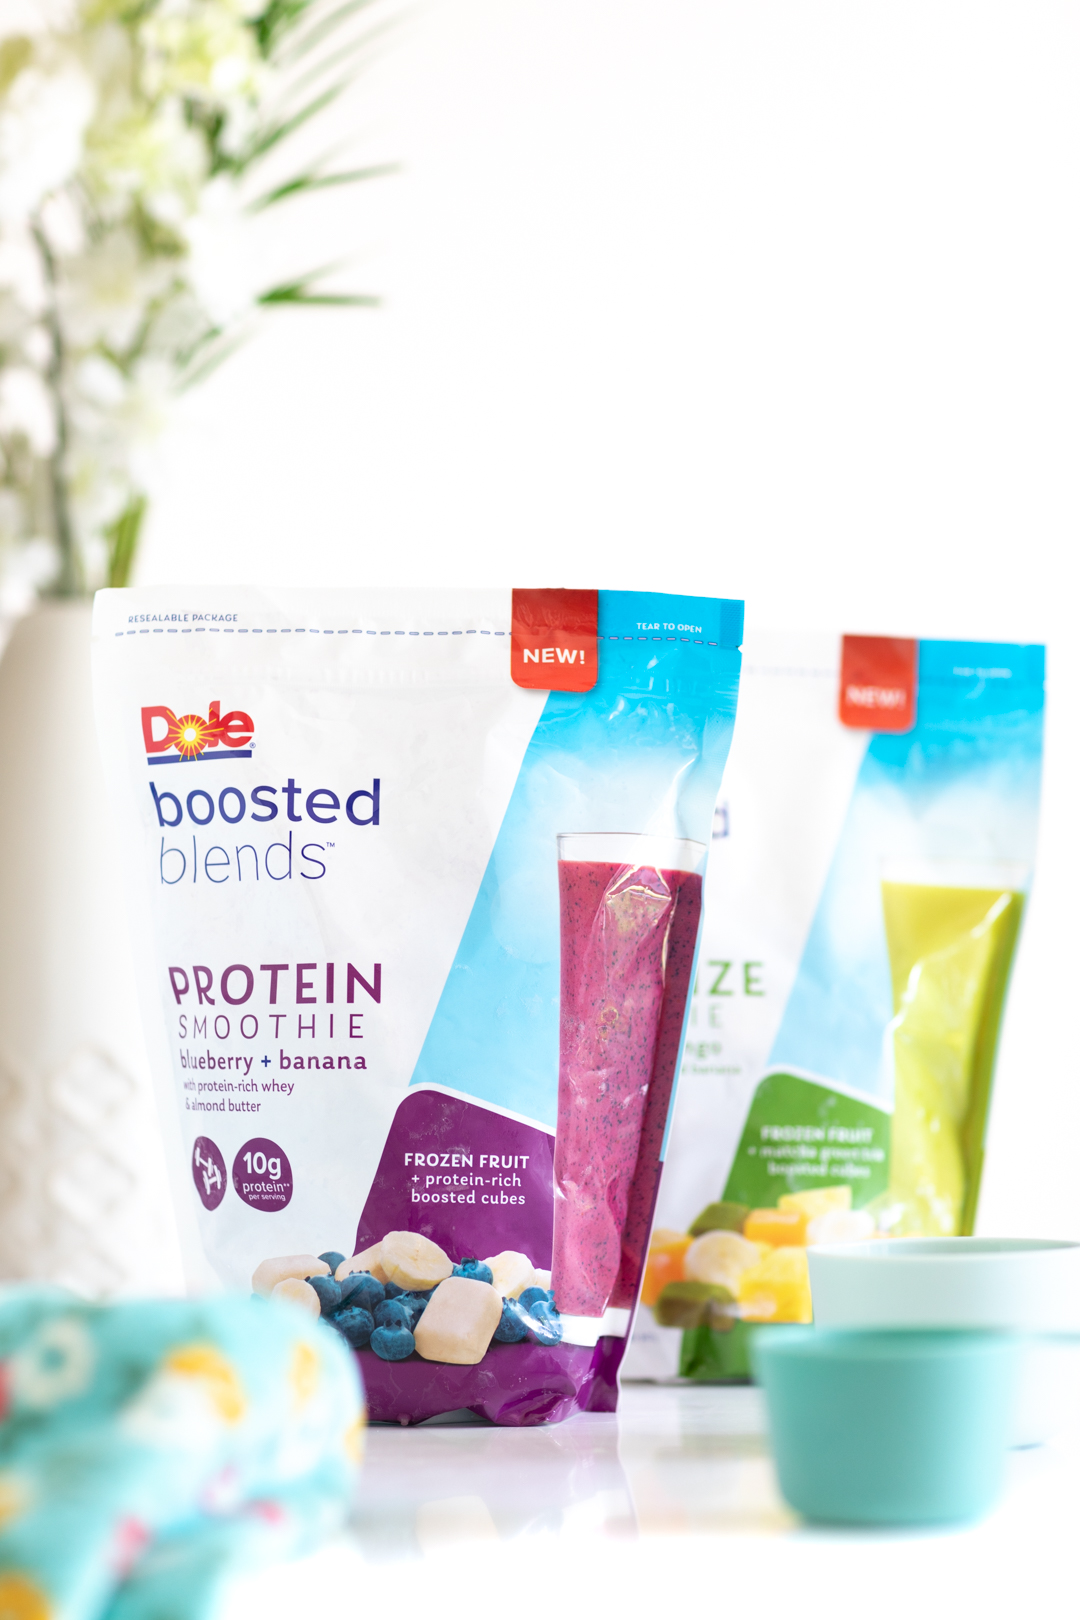 Dole Boosted Blends Protein variety in packaging on table with flowers